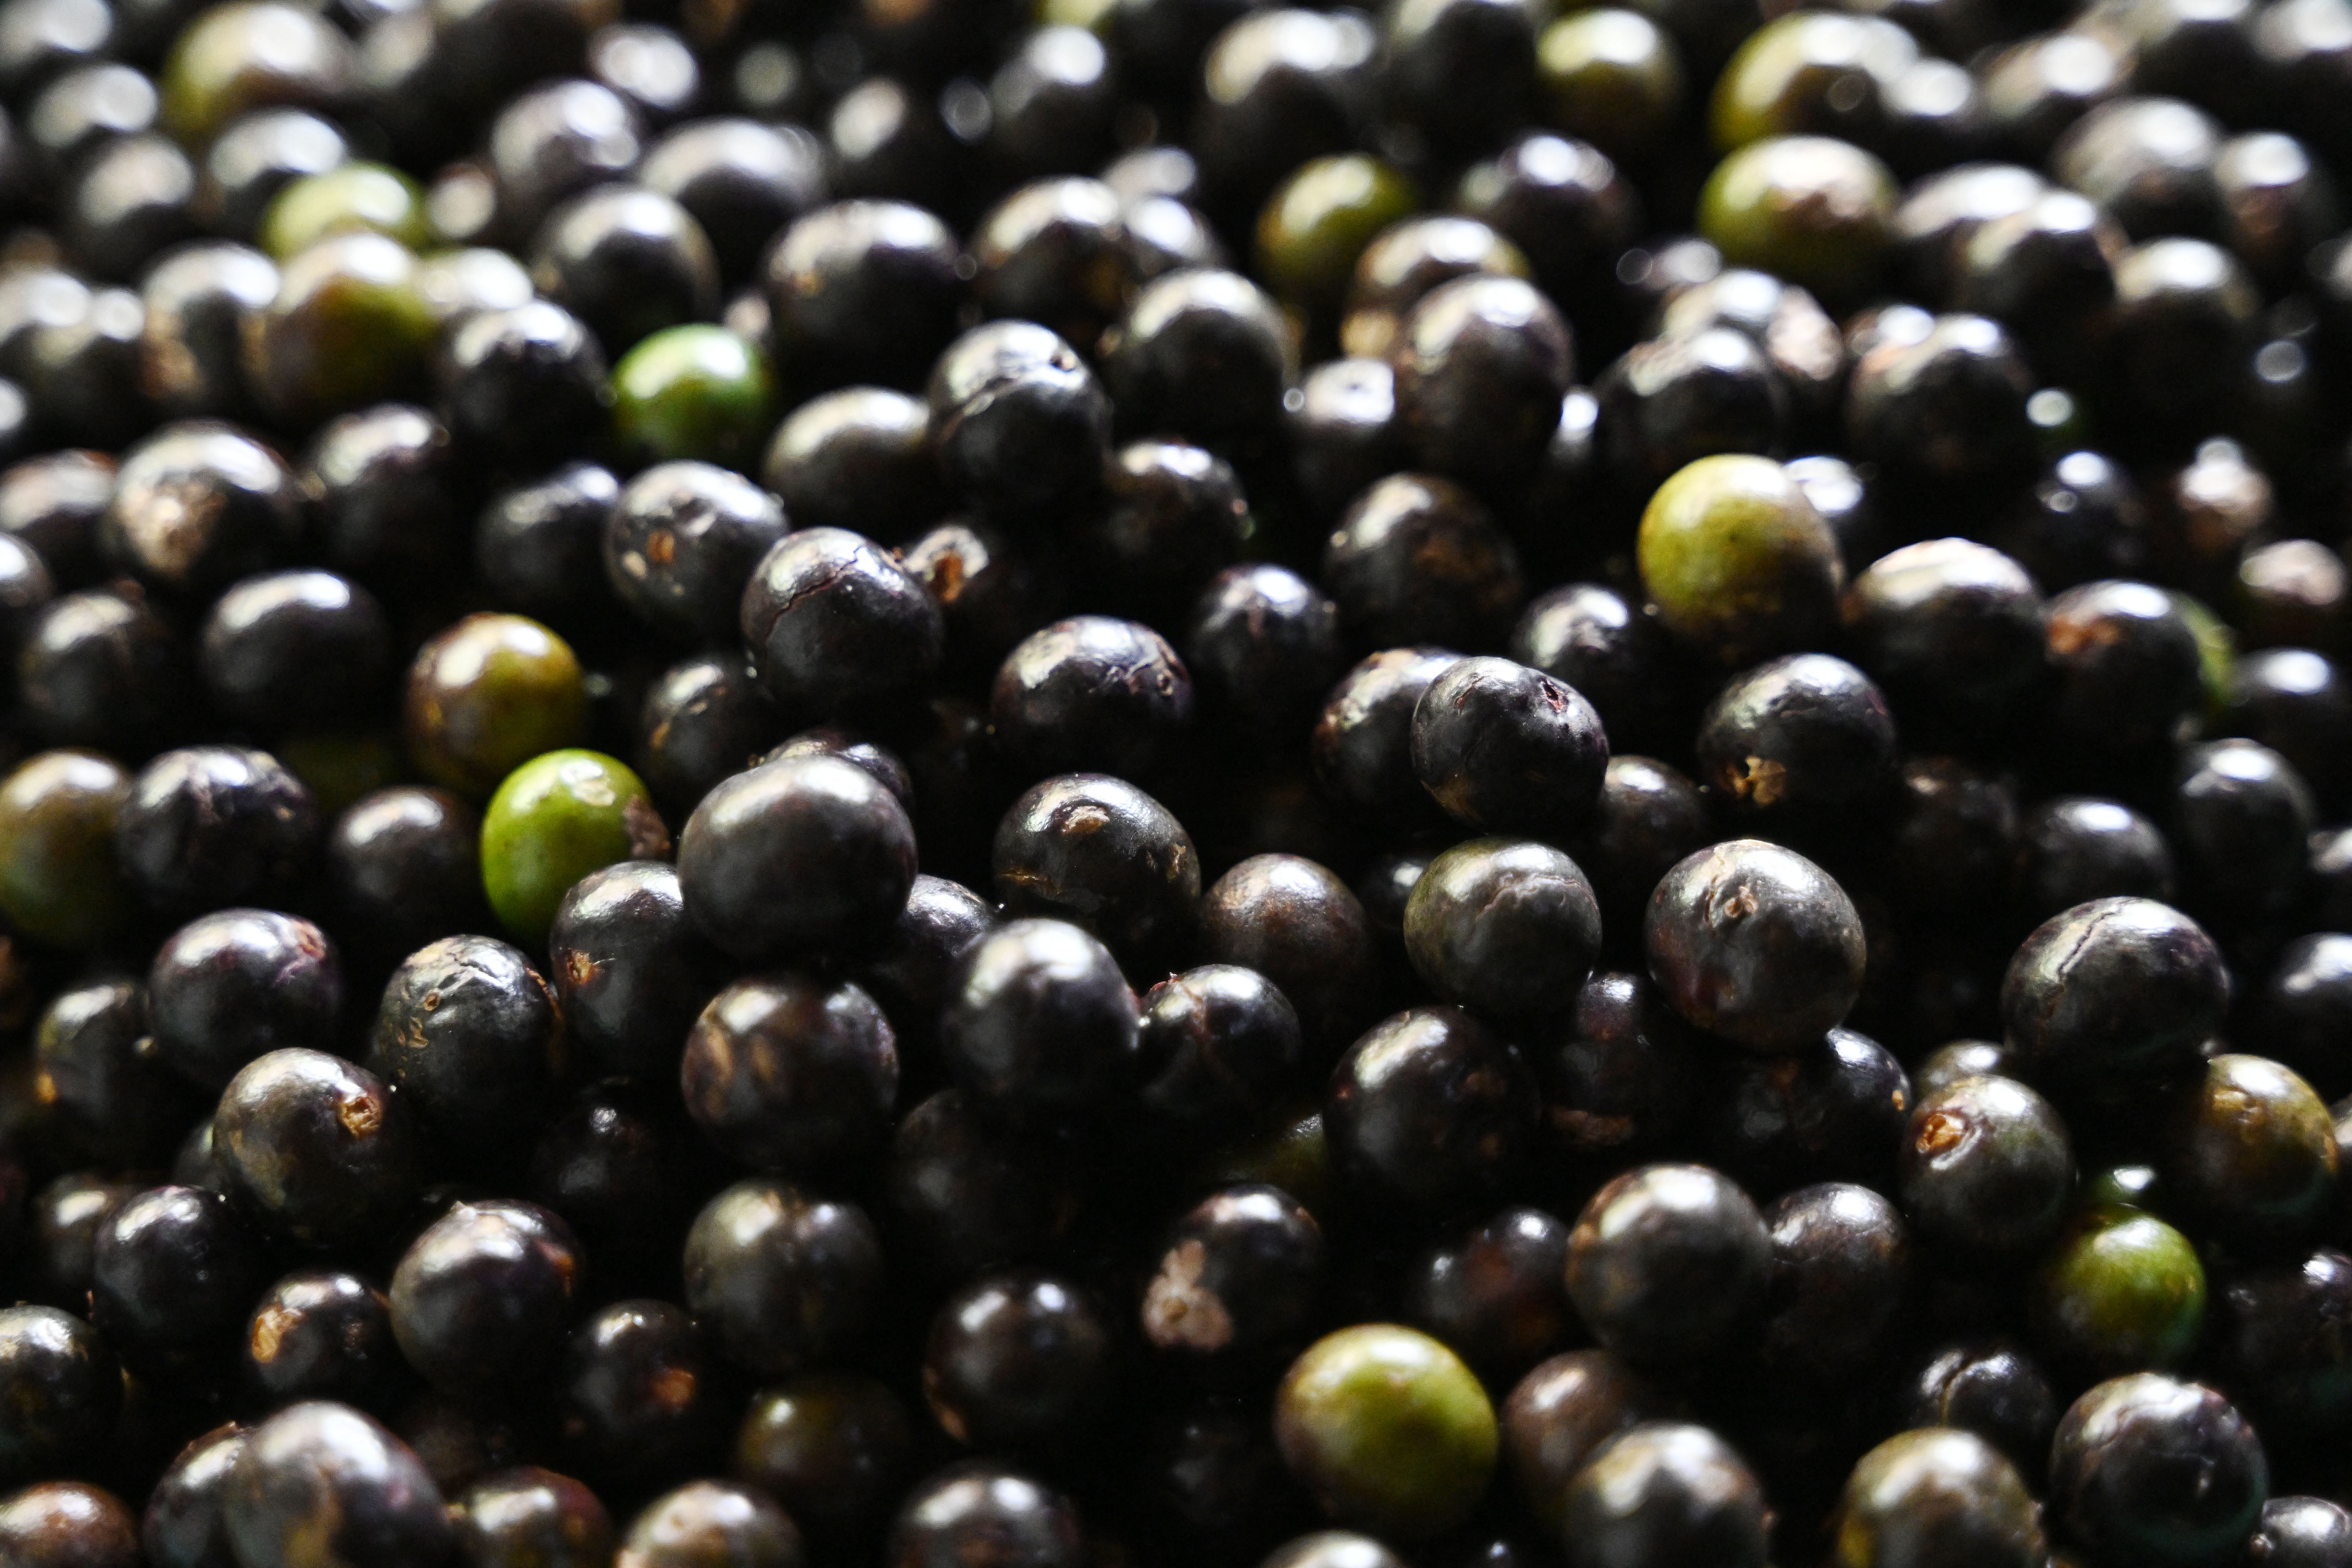 Acai berry is deemed a superfood